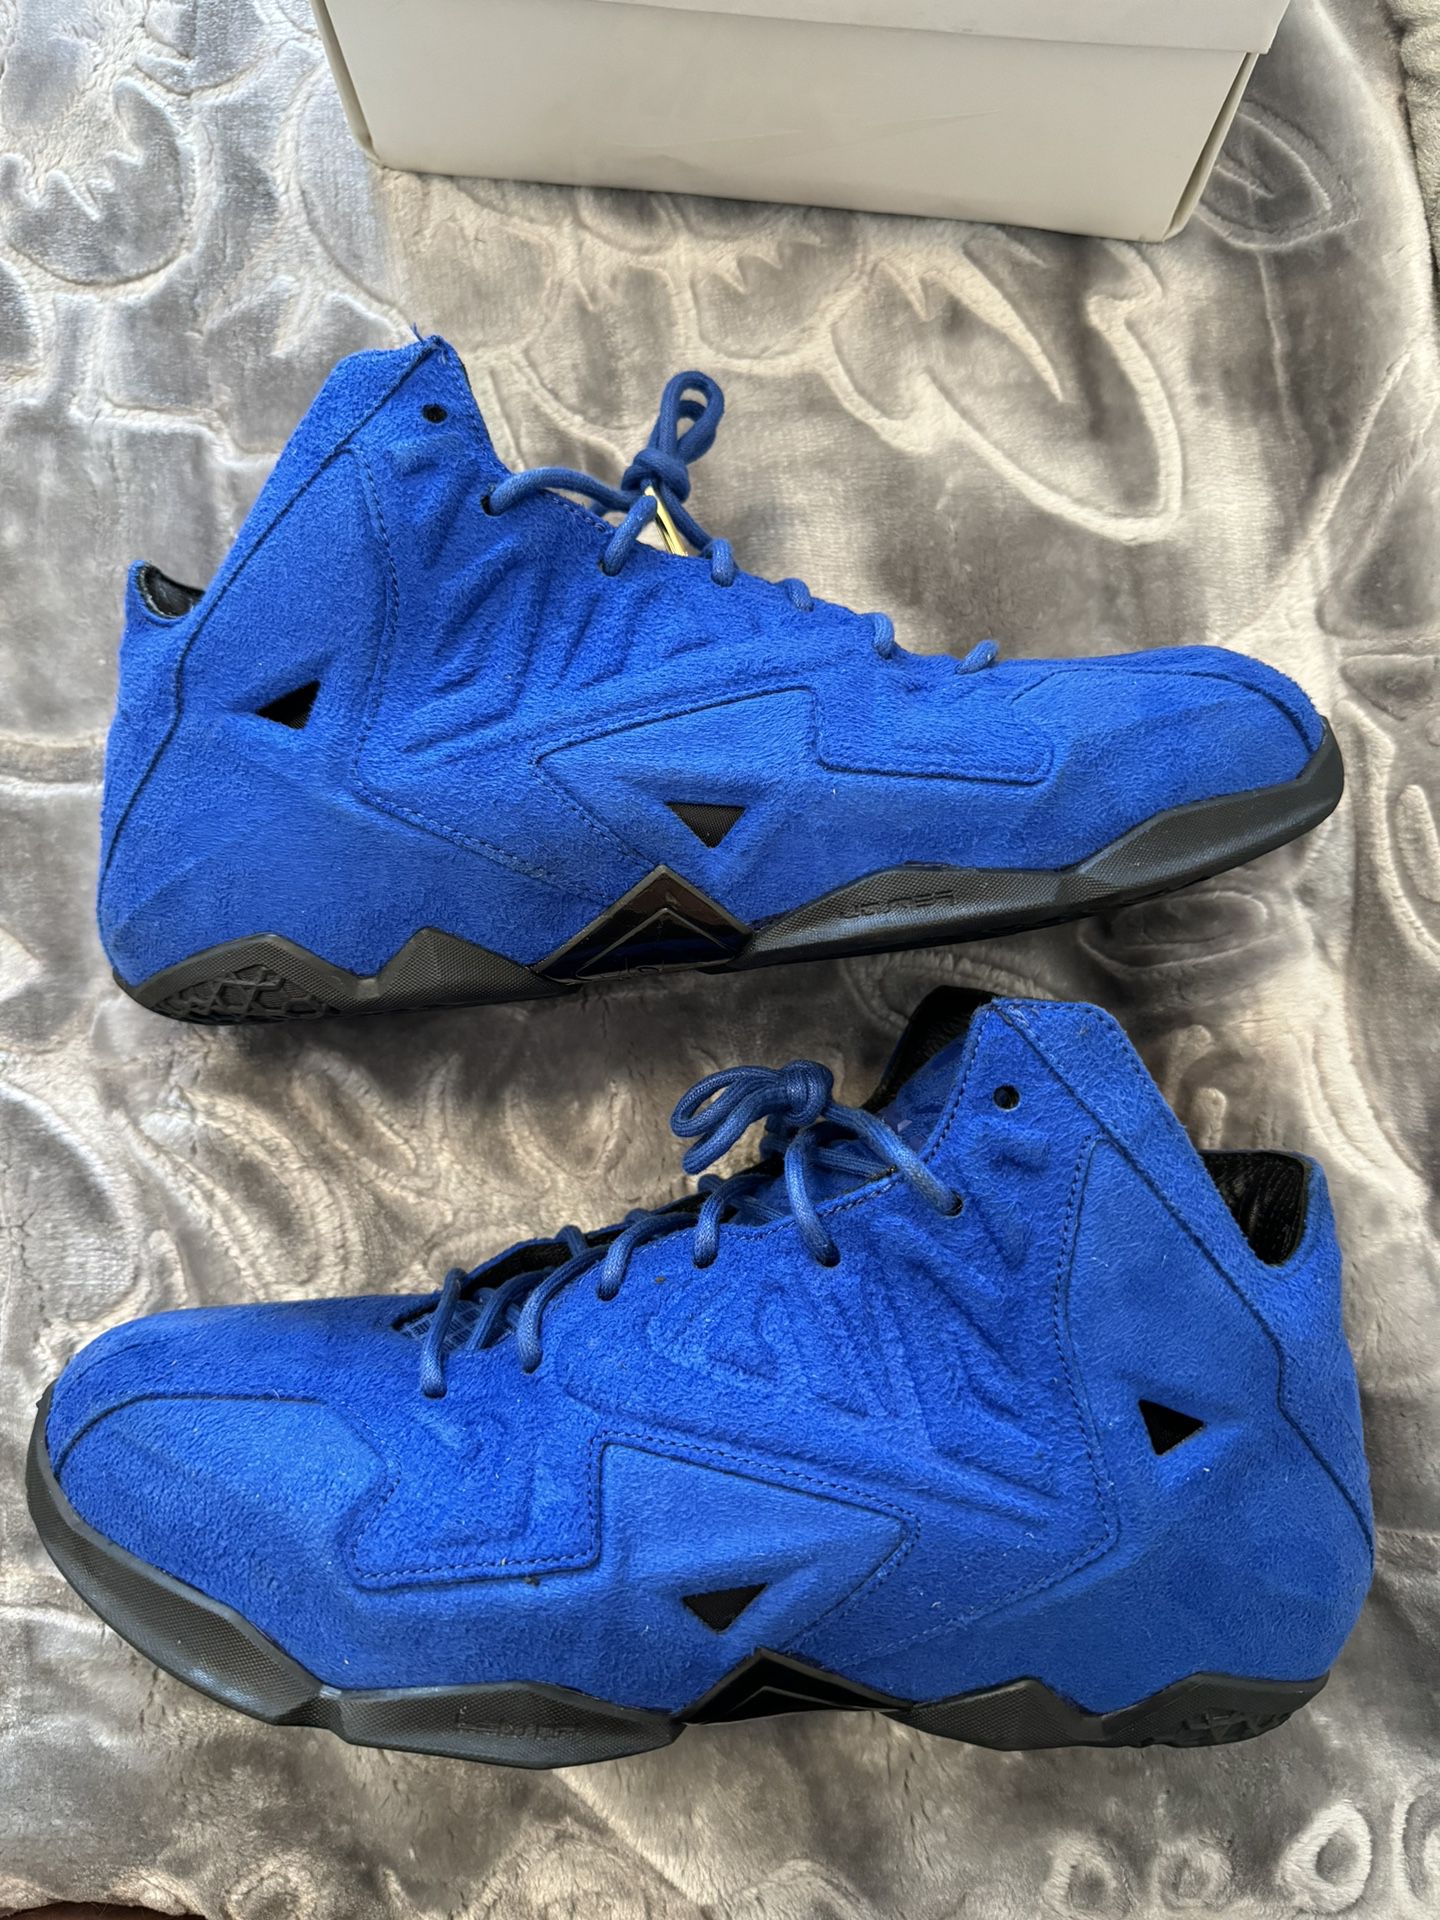 Lebron 11 EXT Suede QS “Game Royal” Size 9.5